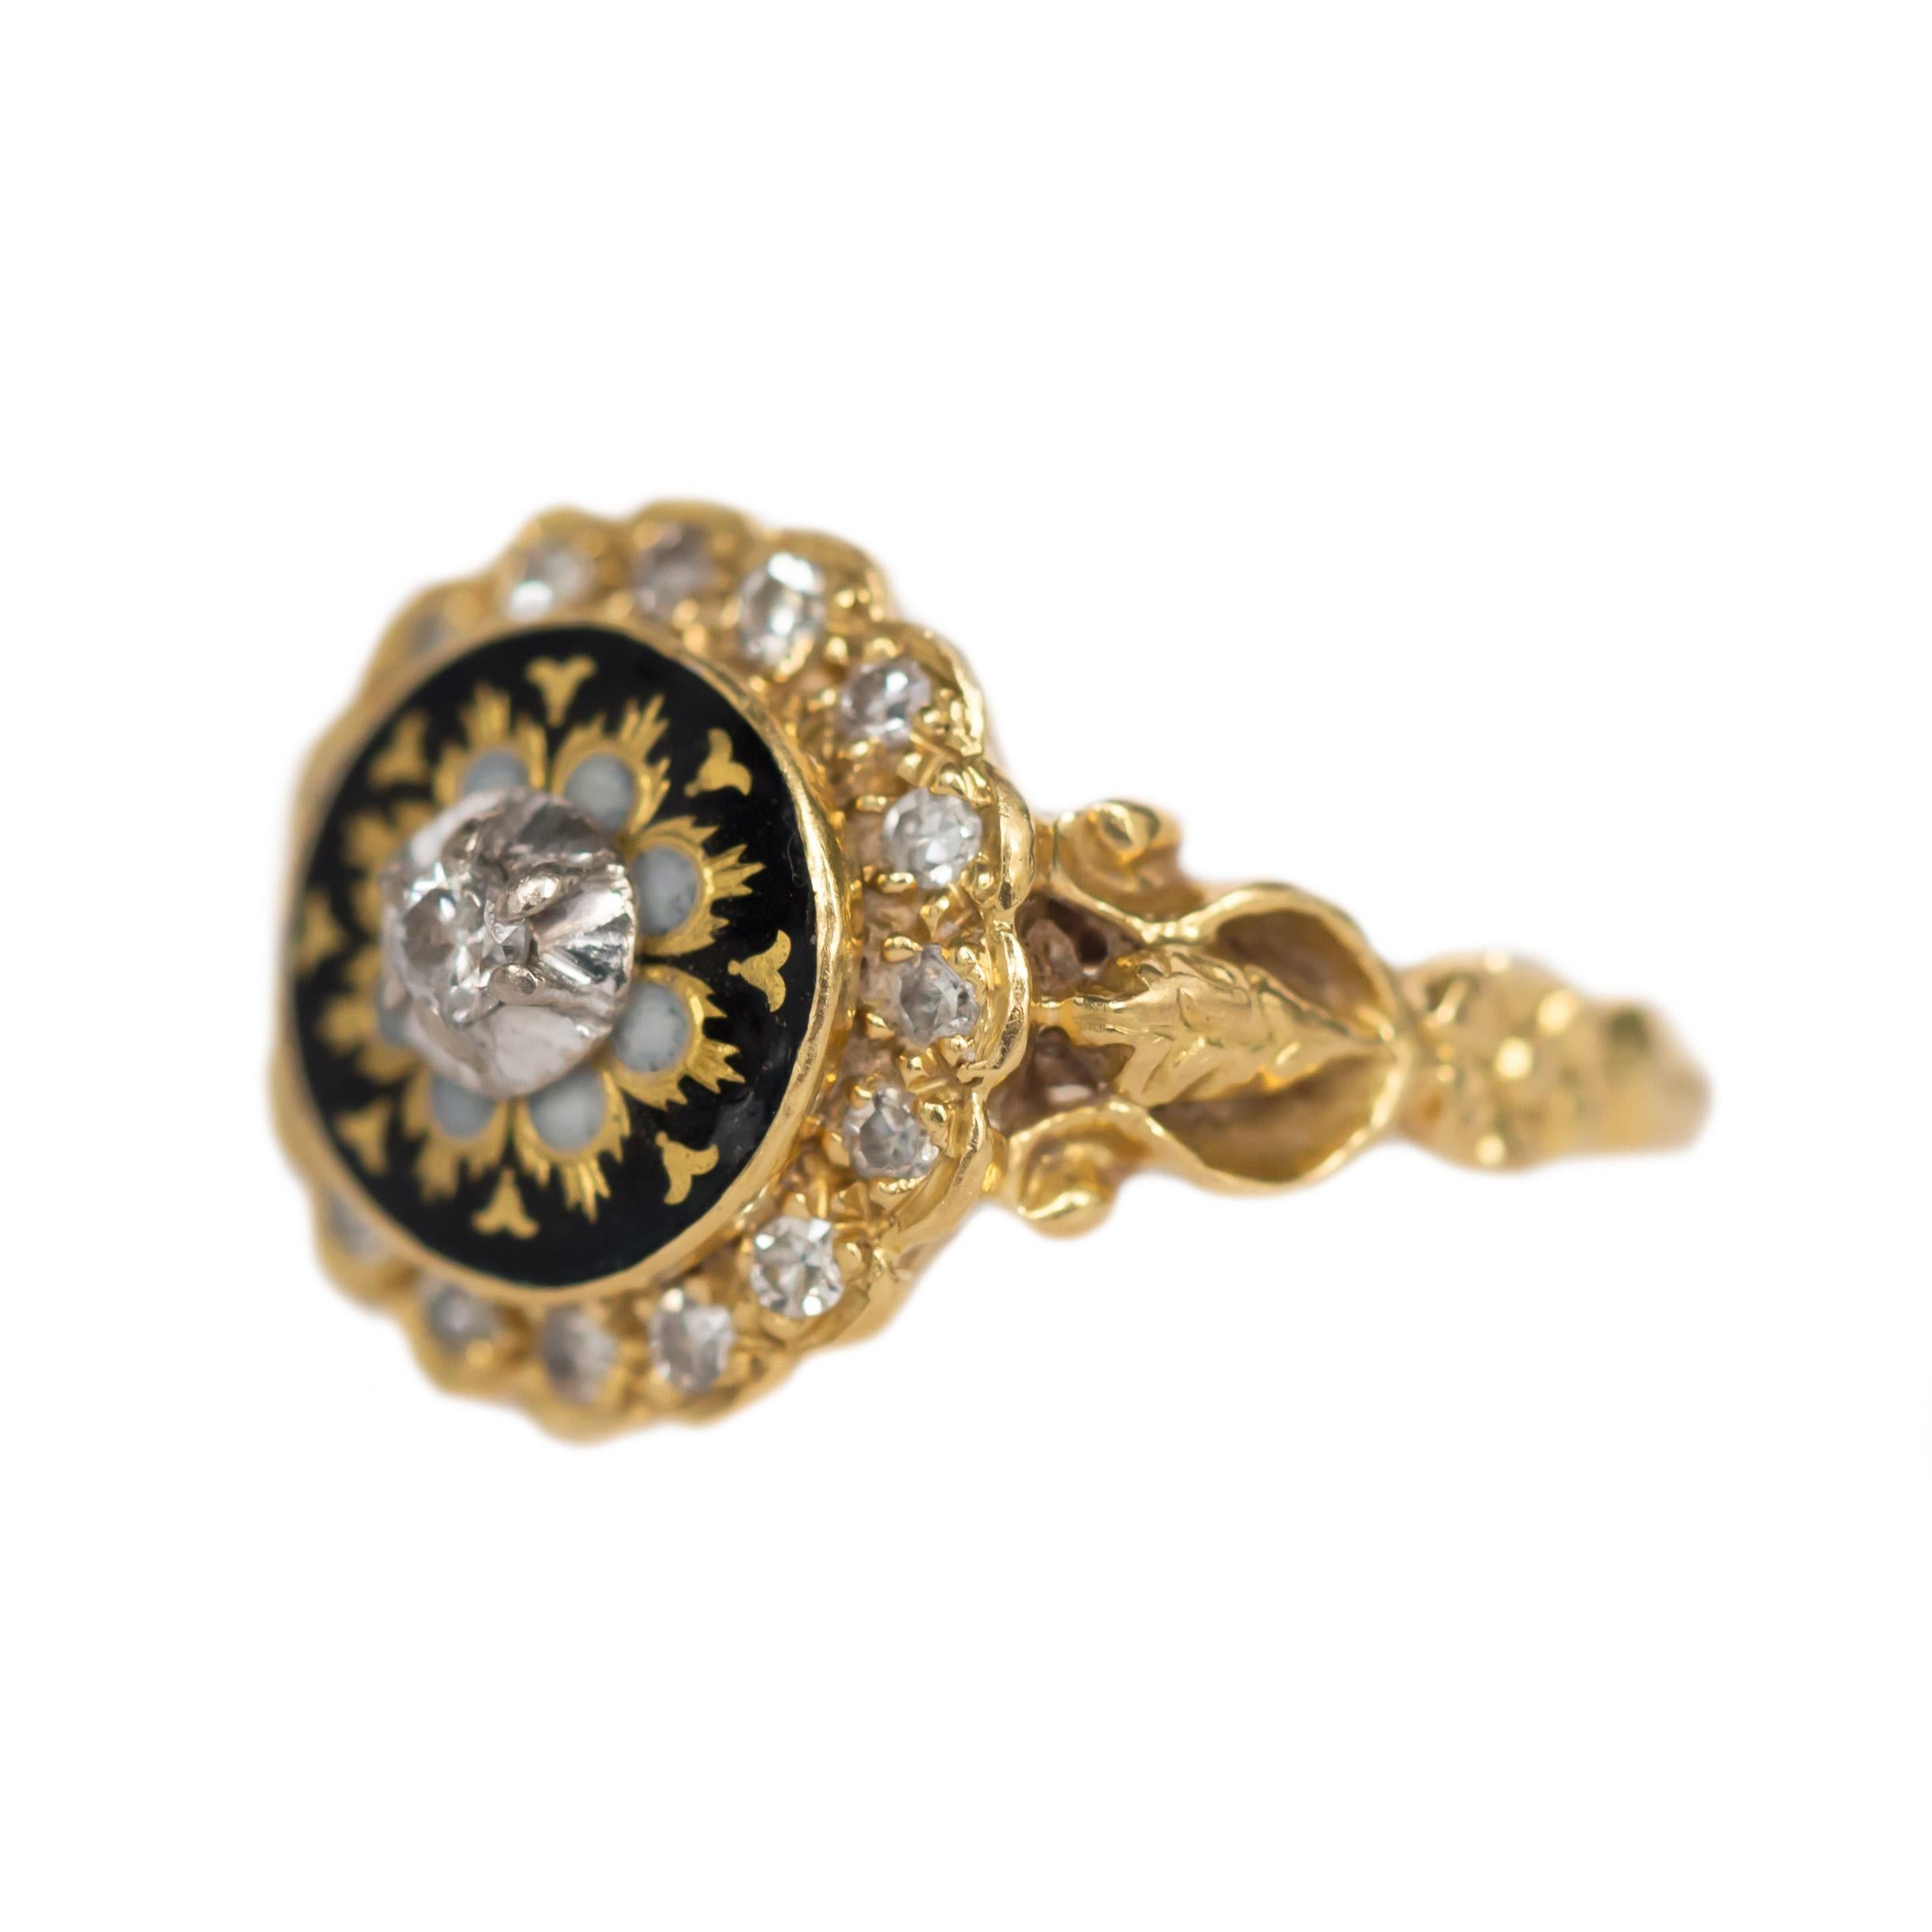 Ring Size: 6
Metal Type: 18 karat Yellow Gold [Hallmarked, and Tested]
Weight:  4.1 grams

Diamond Details:
Weight: .20 carat, total weight
Cut: Antique European
Color: G
Clarity: VS


Finger to Top of Stone Measurement: 3mm
Condition:  Excellent